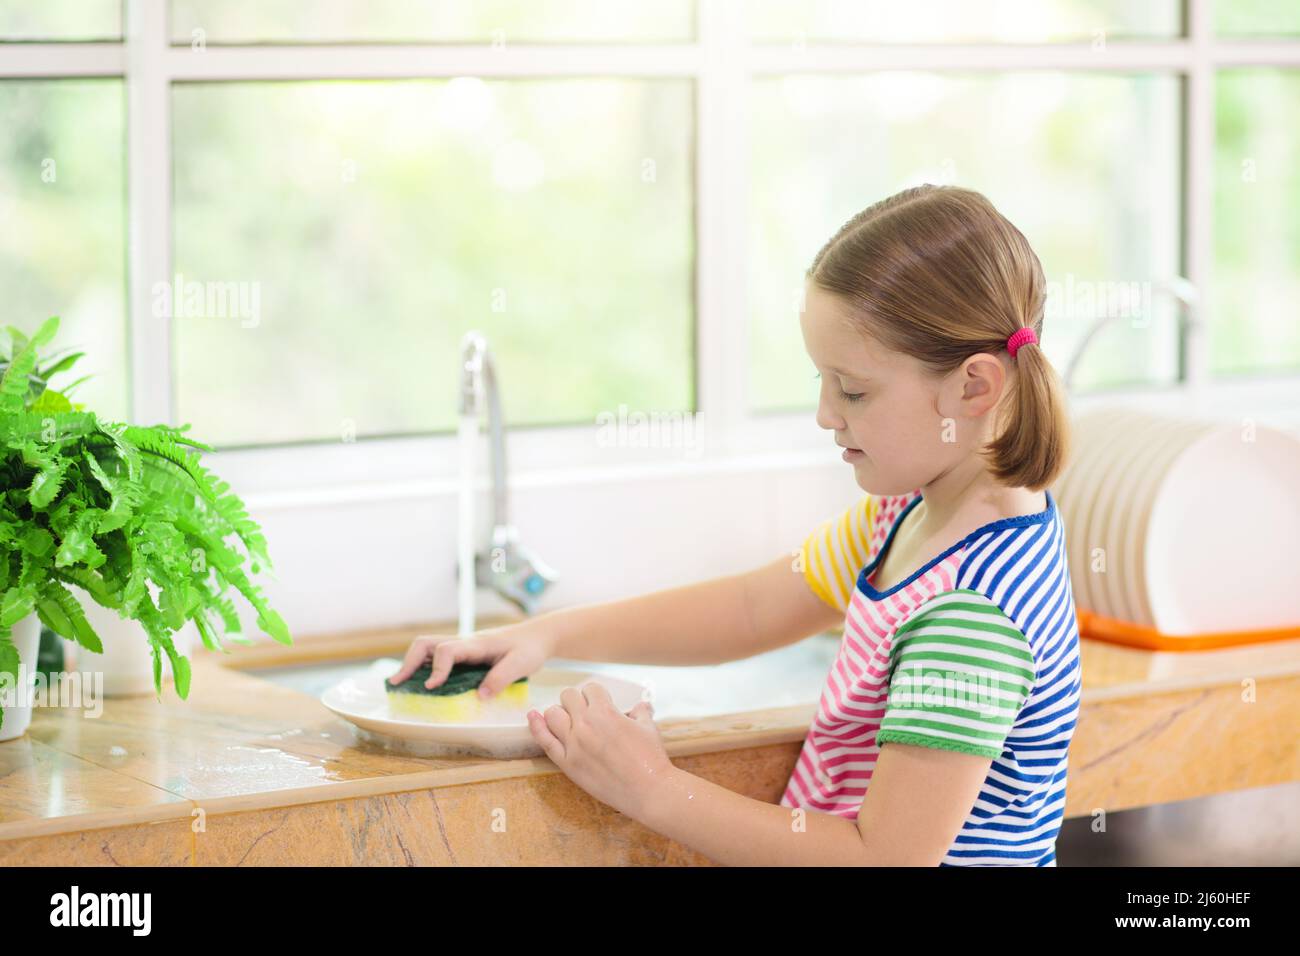 https://c8.alamy.com/comp/2J60HEF/child-washing-dishes-home-chores-kid-in-white-kitchen-cleaning-plates-after-lunch-at-window-2J60HEF.jpg